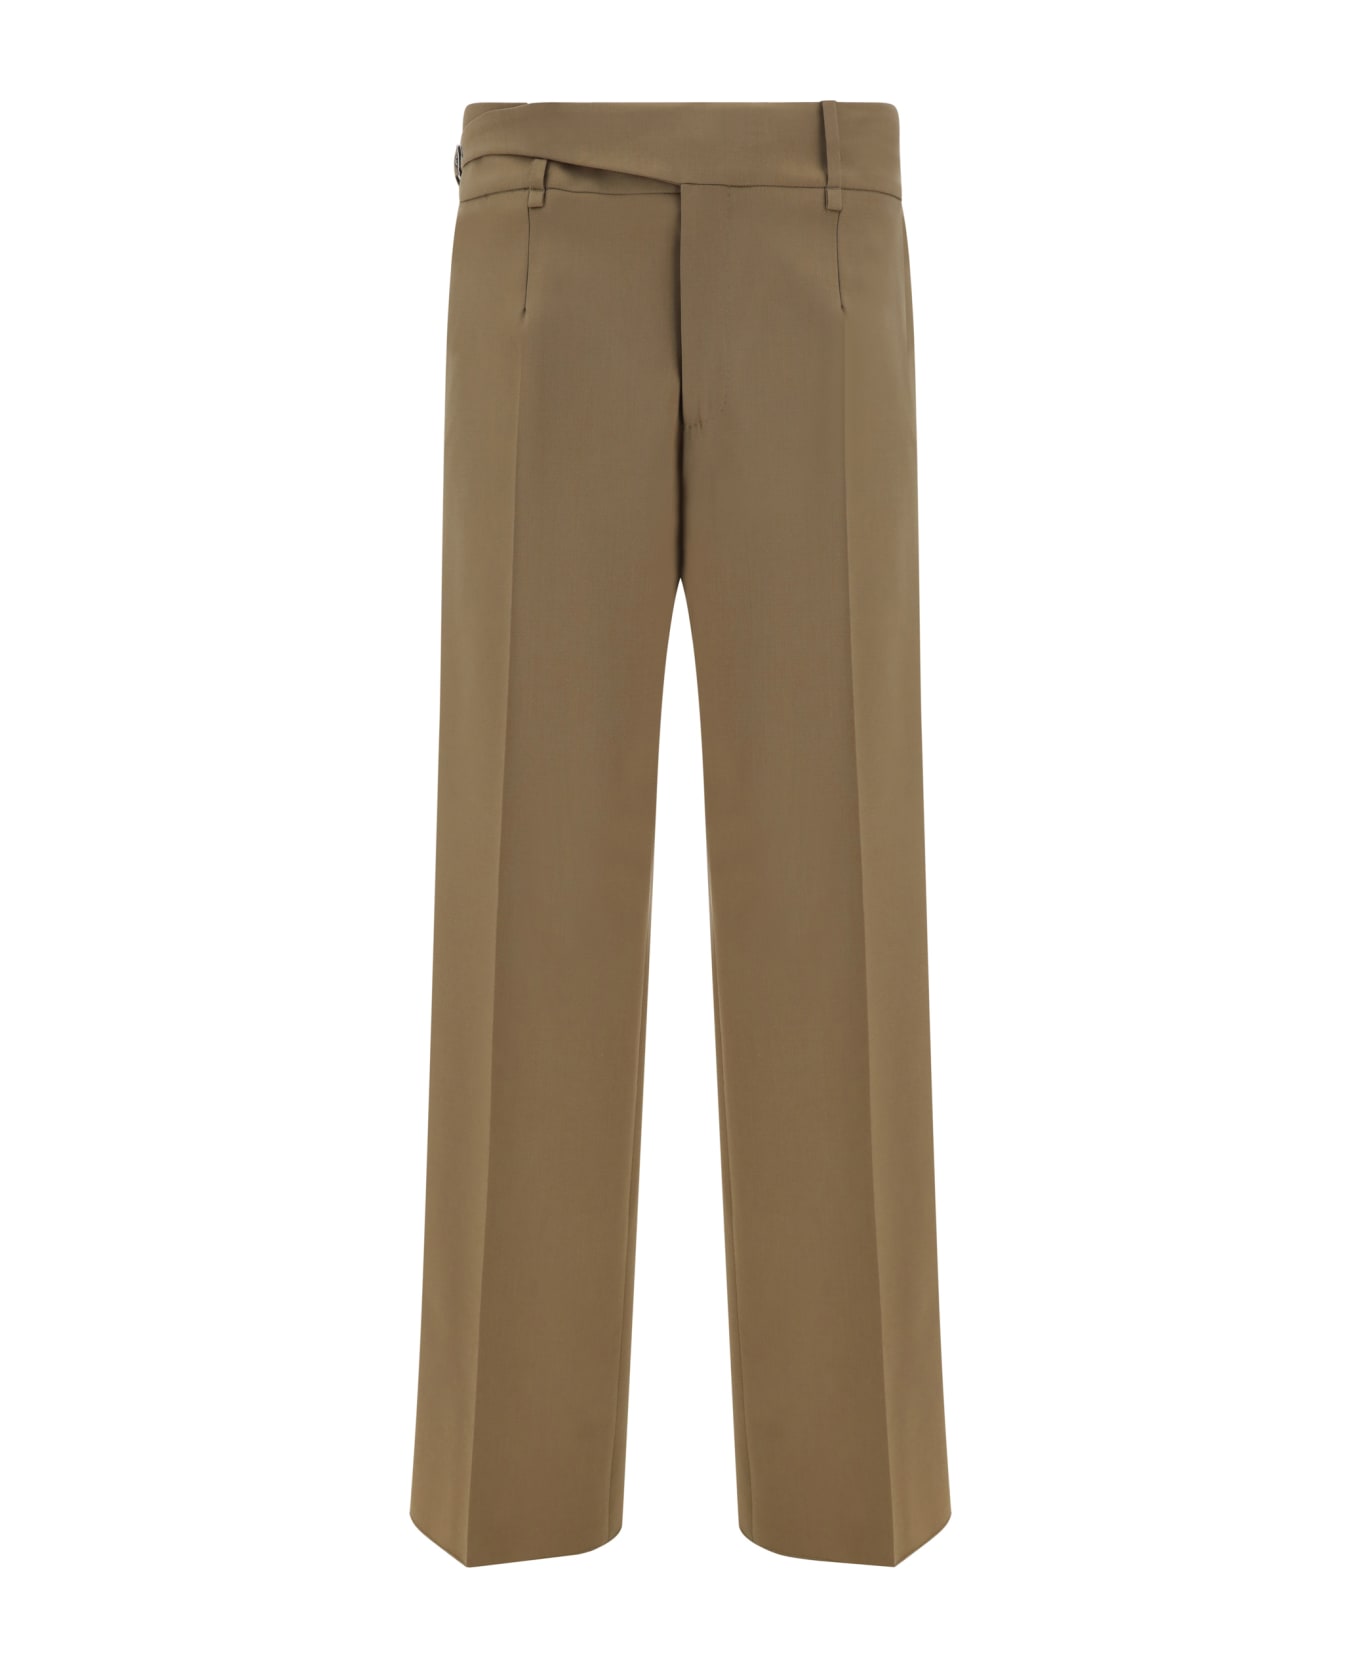 Dolce & Gabbana Tailored Trousers - Brown ボトムス